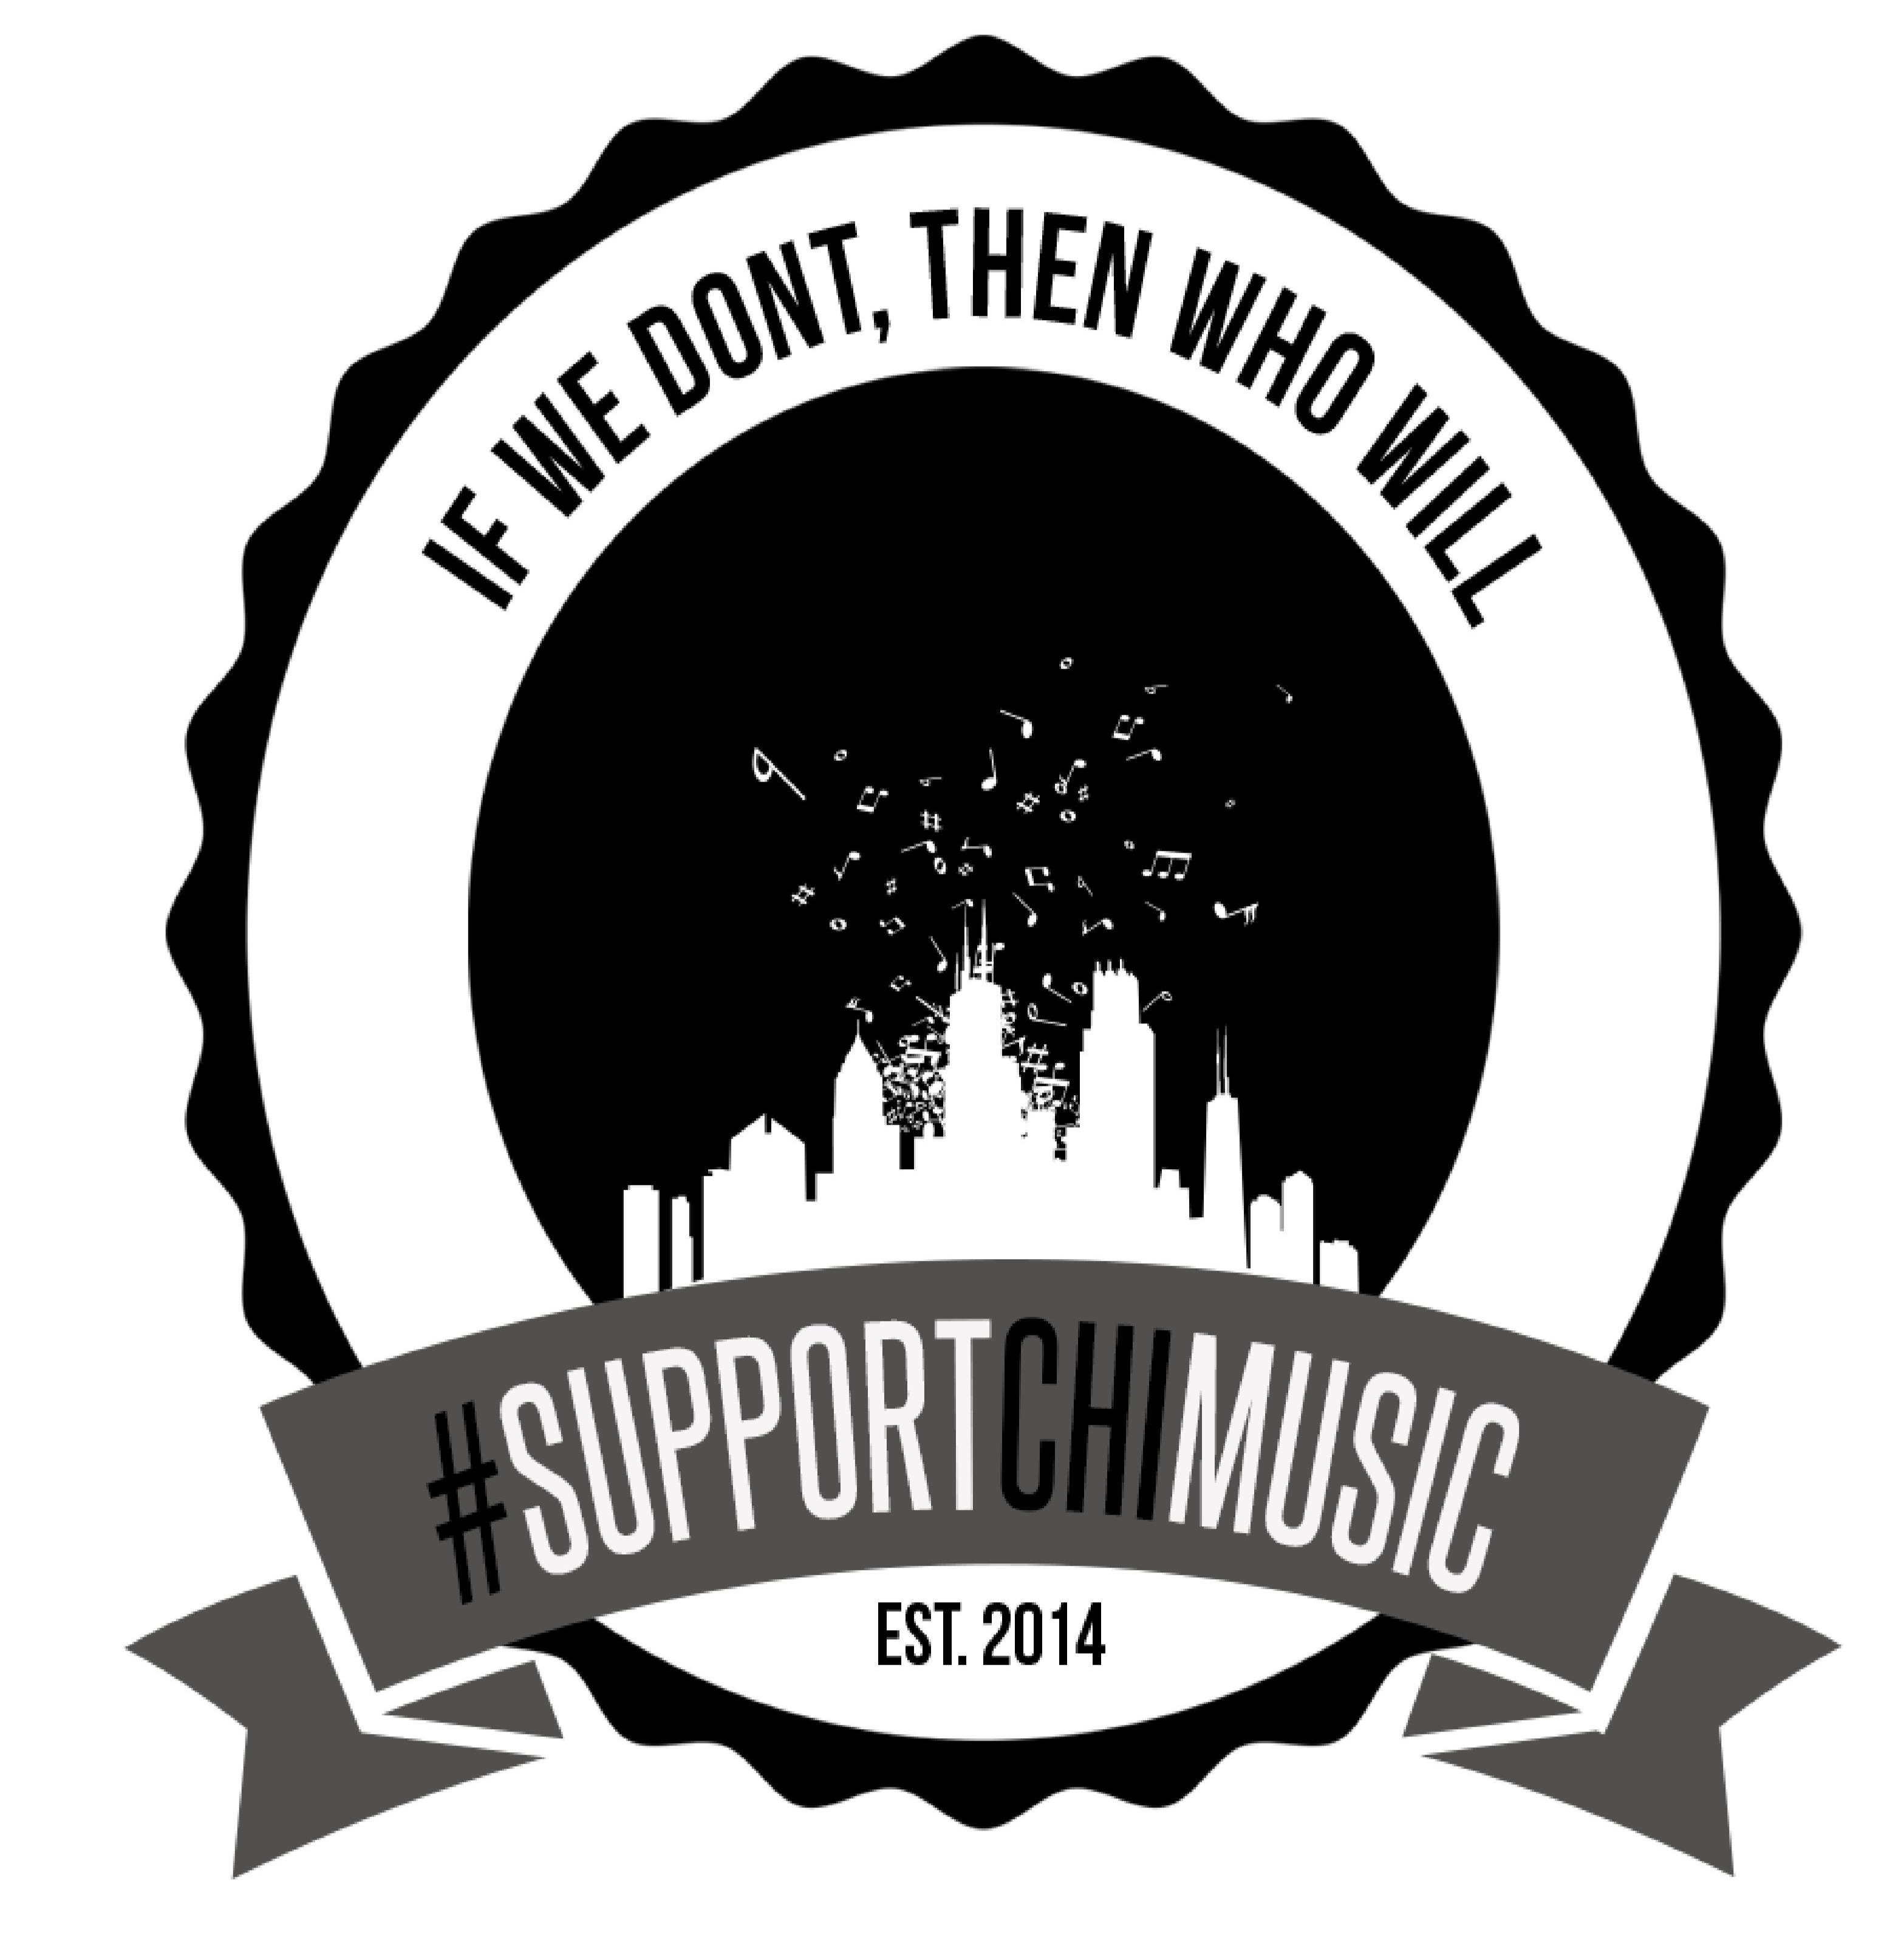 Trademark Logo IF WE DONT, THEN WHO WILL #SUPPORTCHIMUSIC EST. 2014